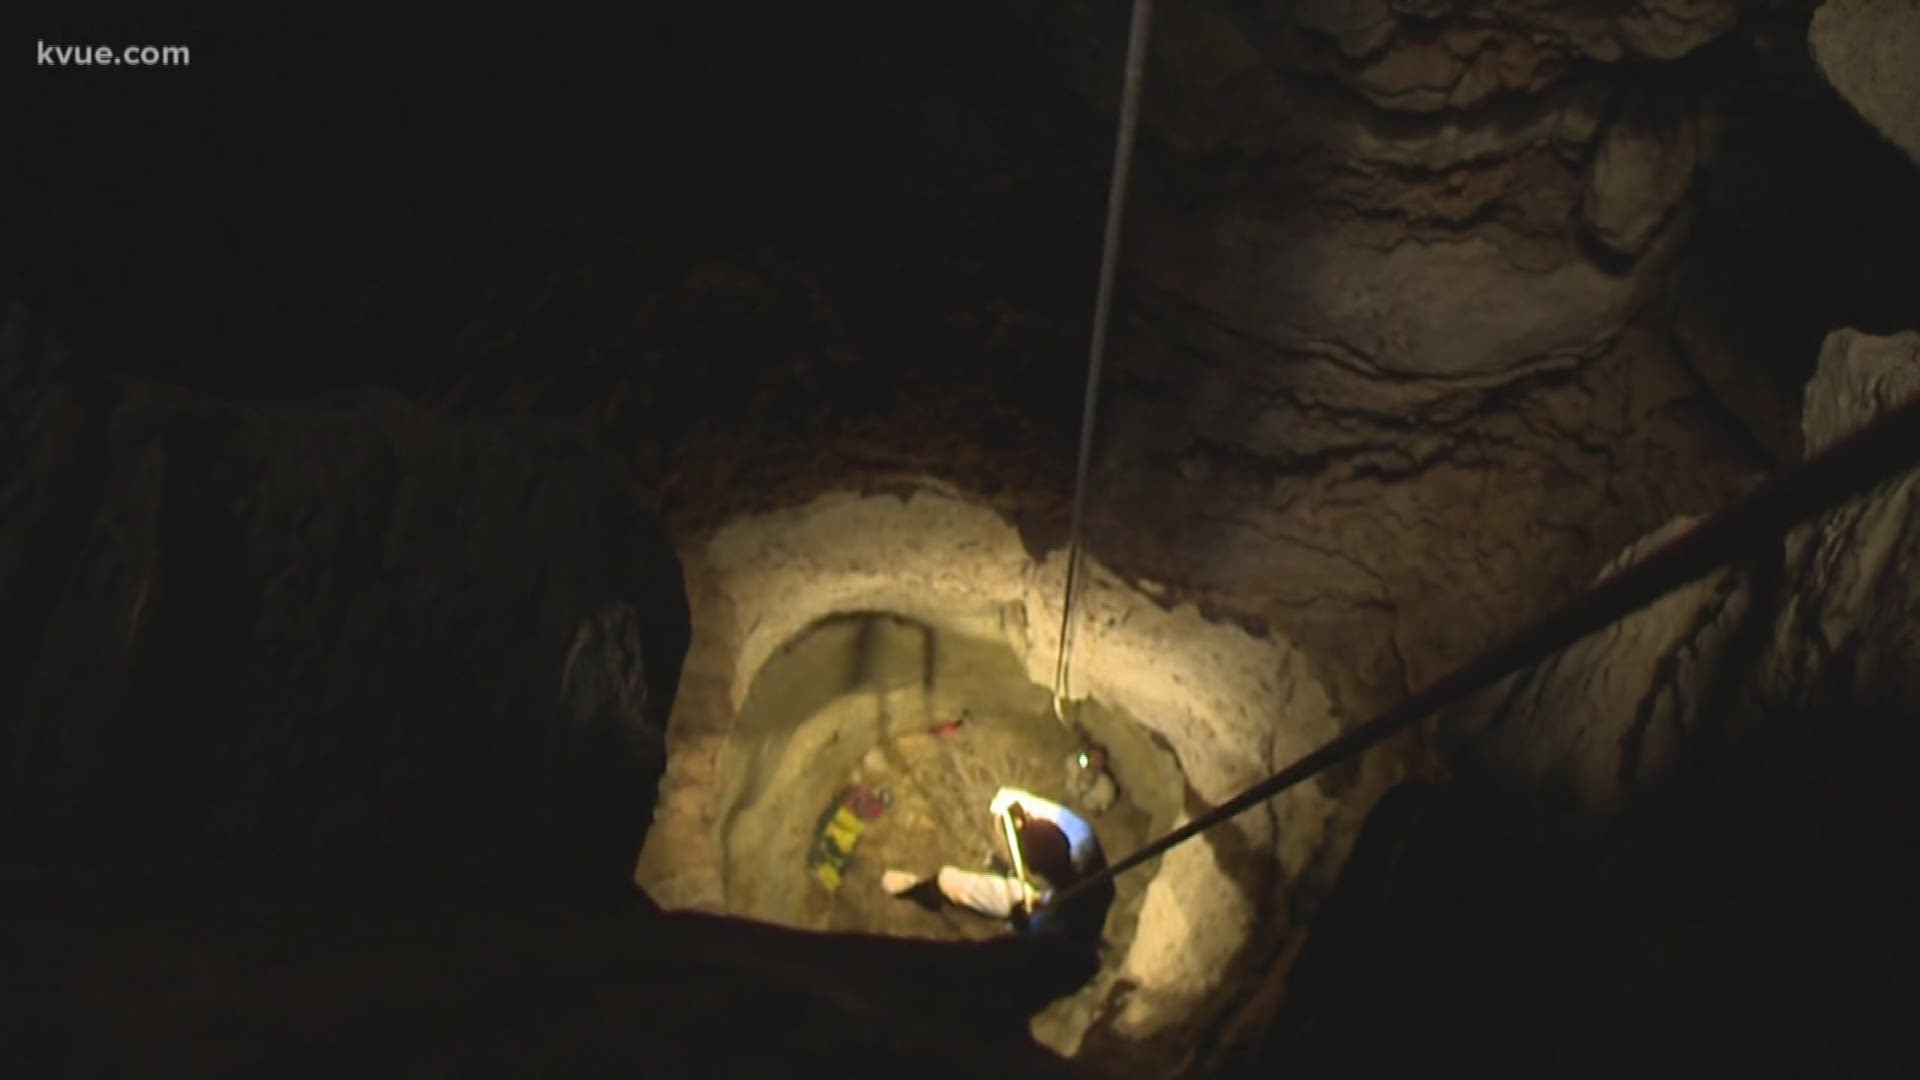 There are caves all throughout Austin that the city cleans out for environmental reasons.